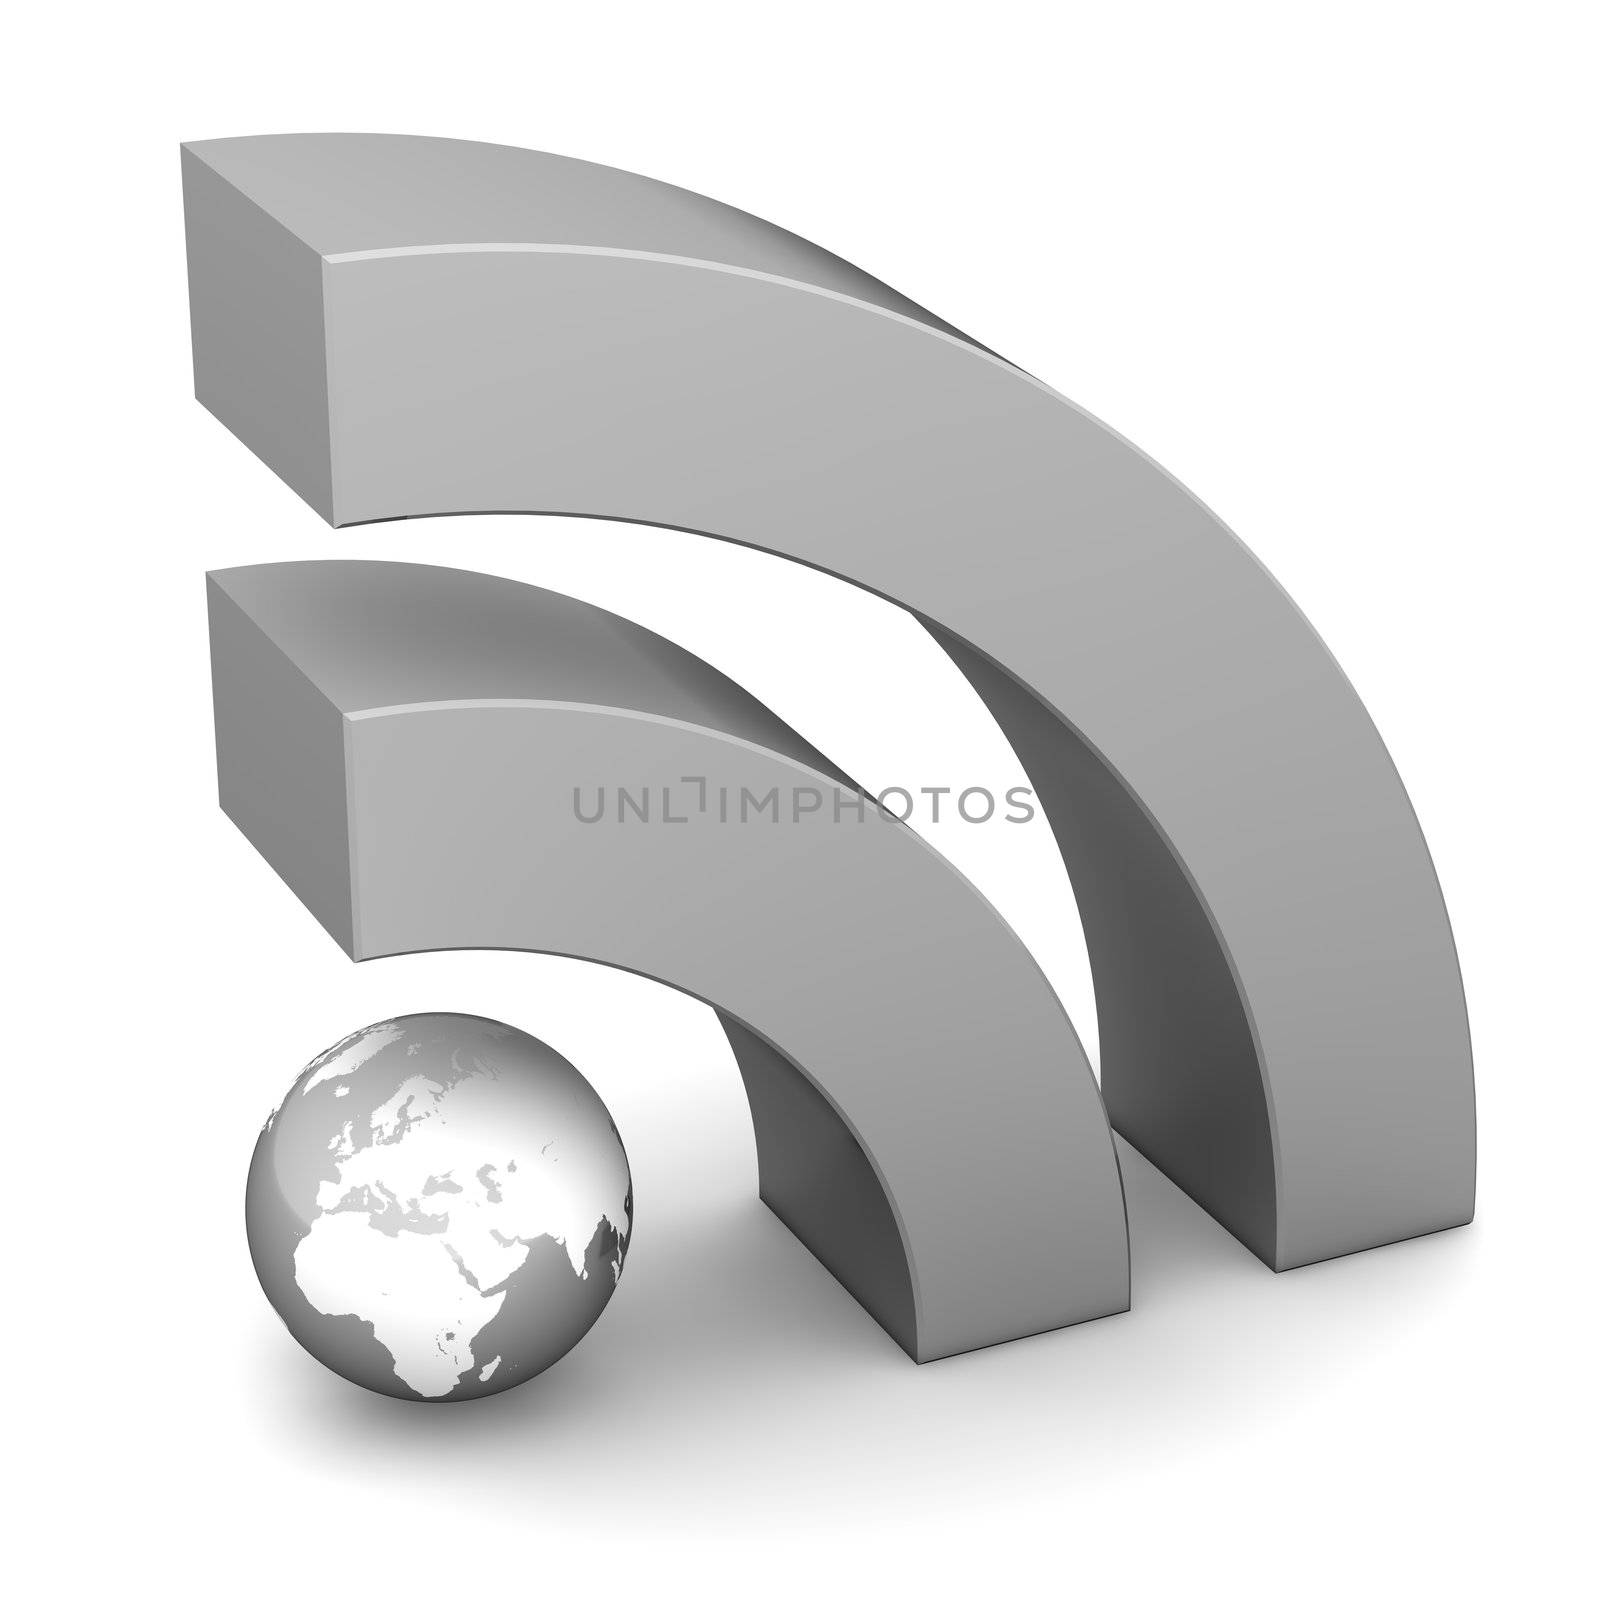 shiny metallic grey RSS symbol rendered in 3D on white ground